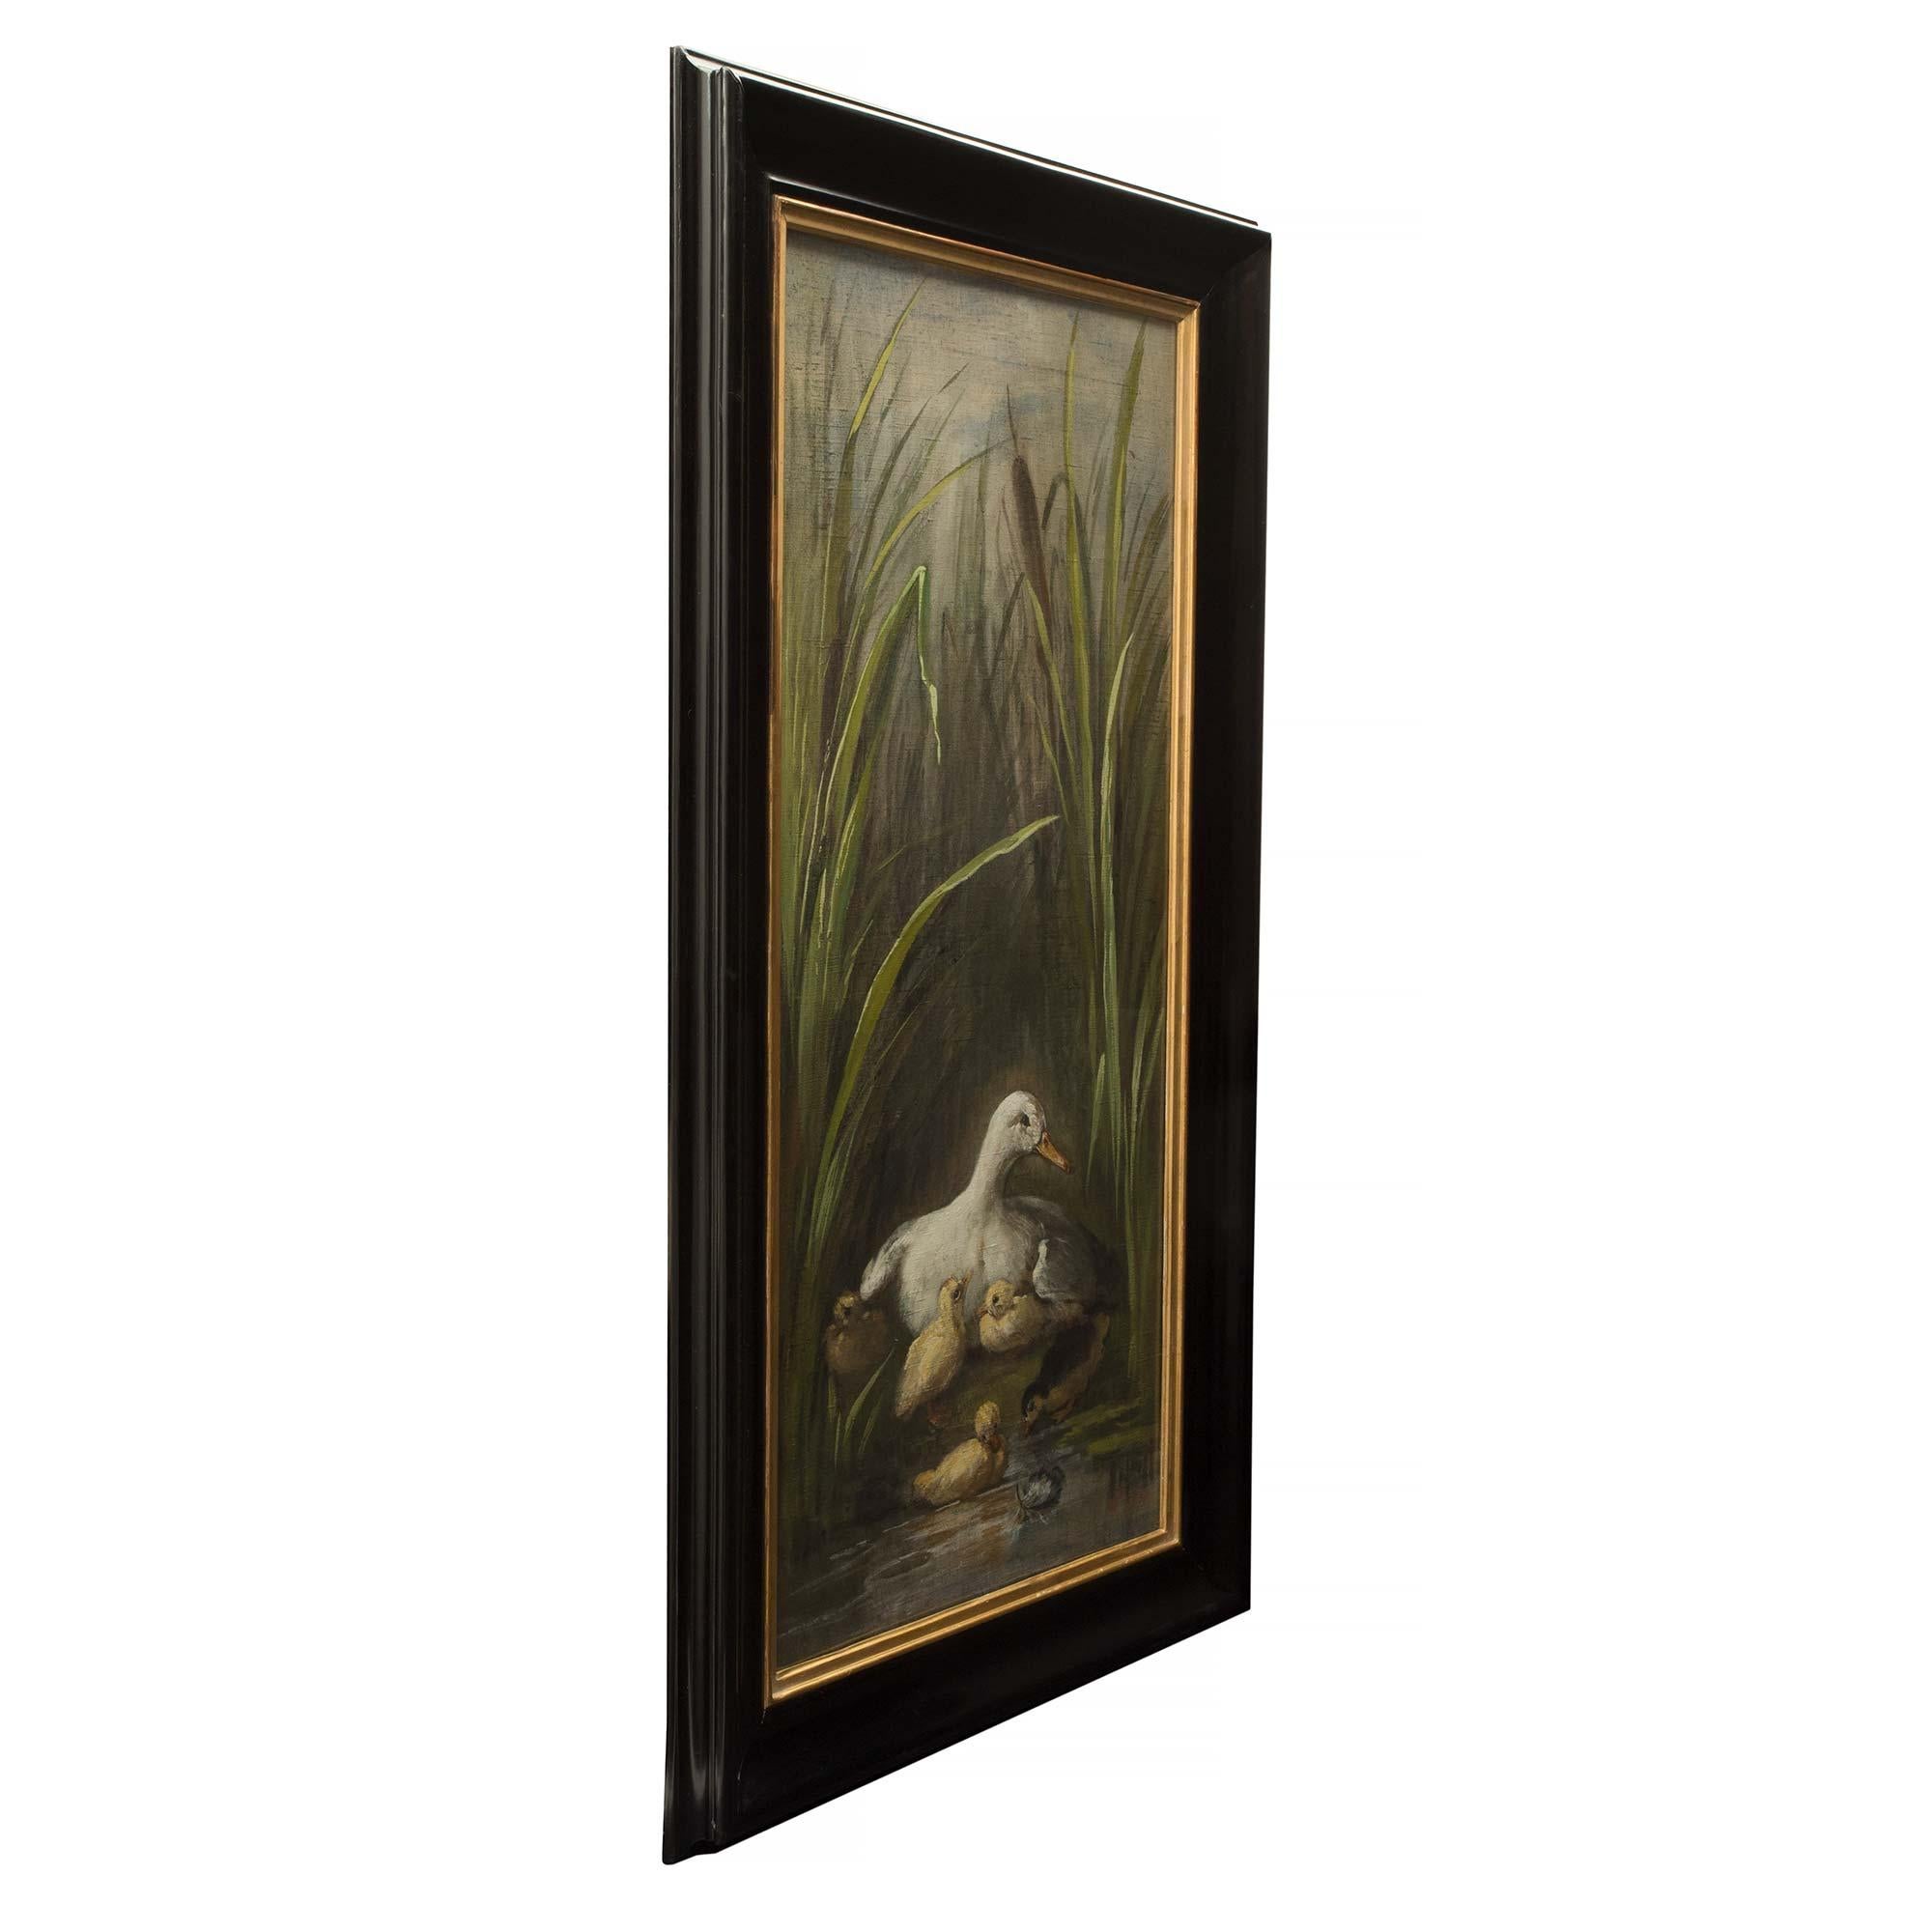 A pair of lovely French mid 19th century Napoleon III period oil on canvas, dated 1870. Each painting is within an molded edge frame with giltwood inner border. One painting depicts a duck amidst her ducklings in tall water flora. The other shows a